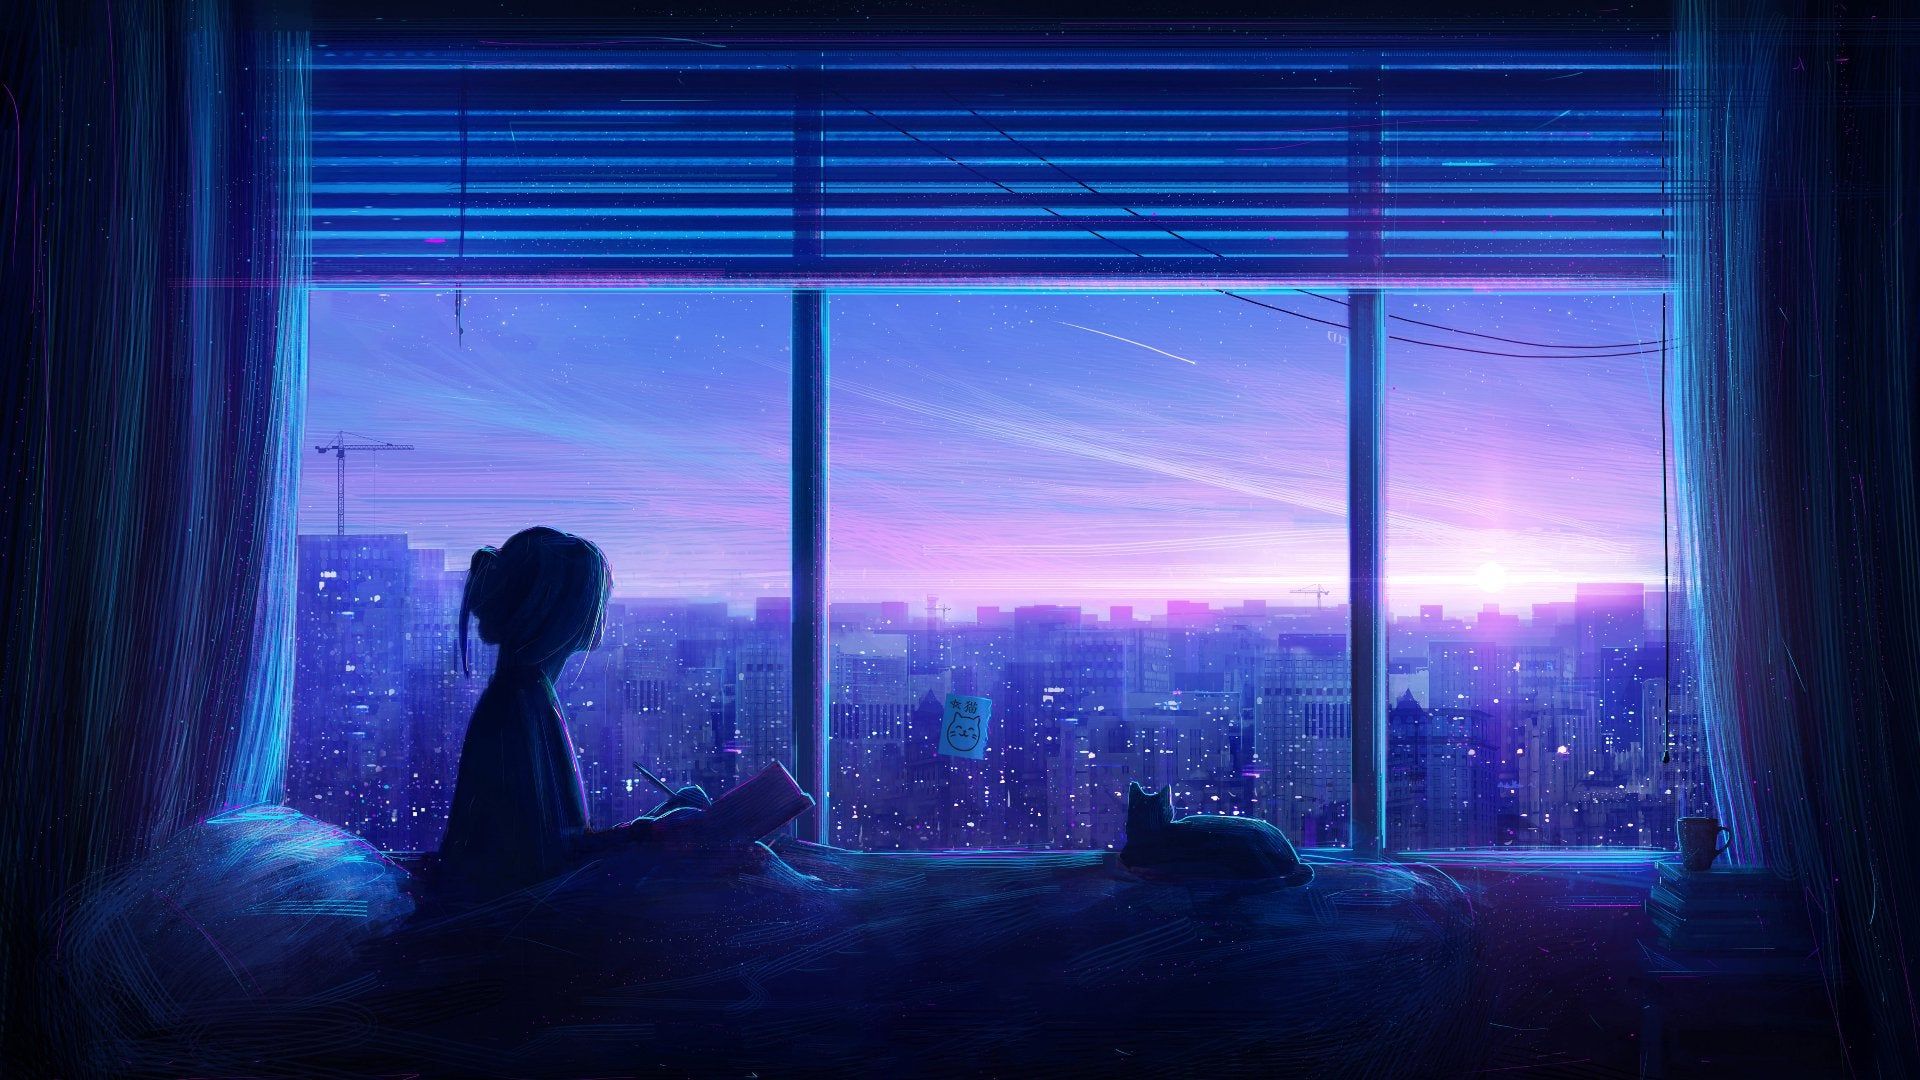 3400x4500 Resolution Lonely Anime Girl in Sunset 3400x4500 Resolution  Wallpaper - Wallpapers Den